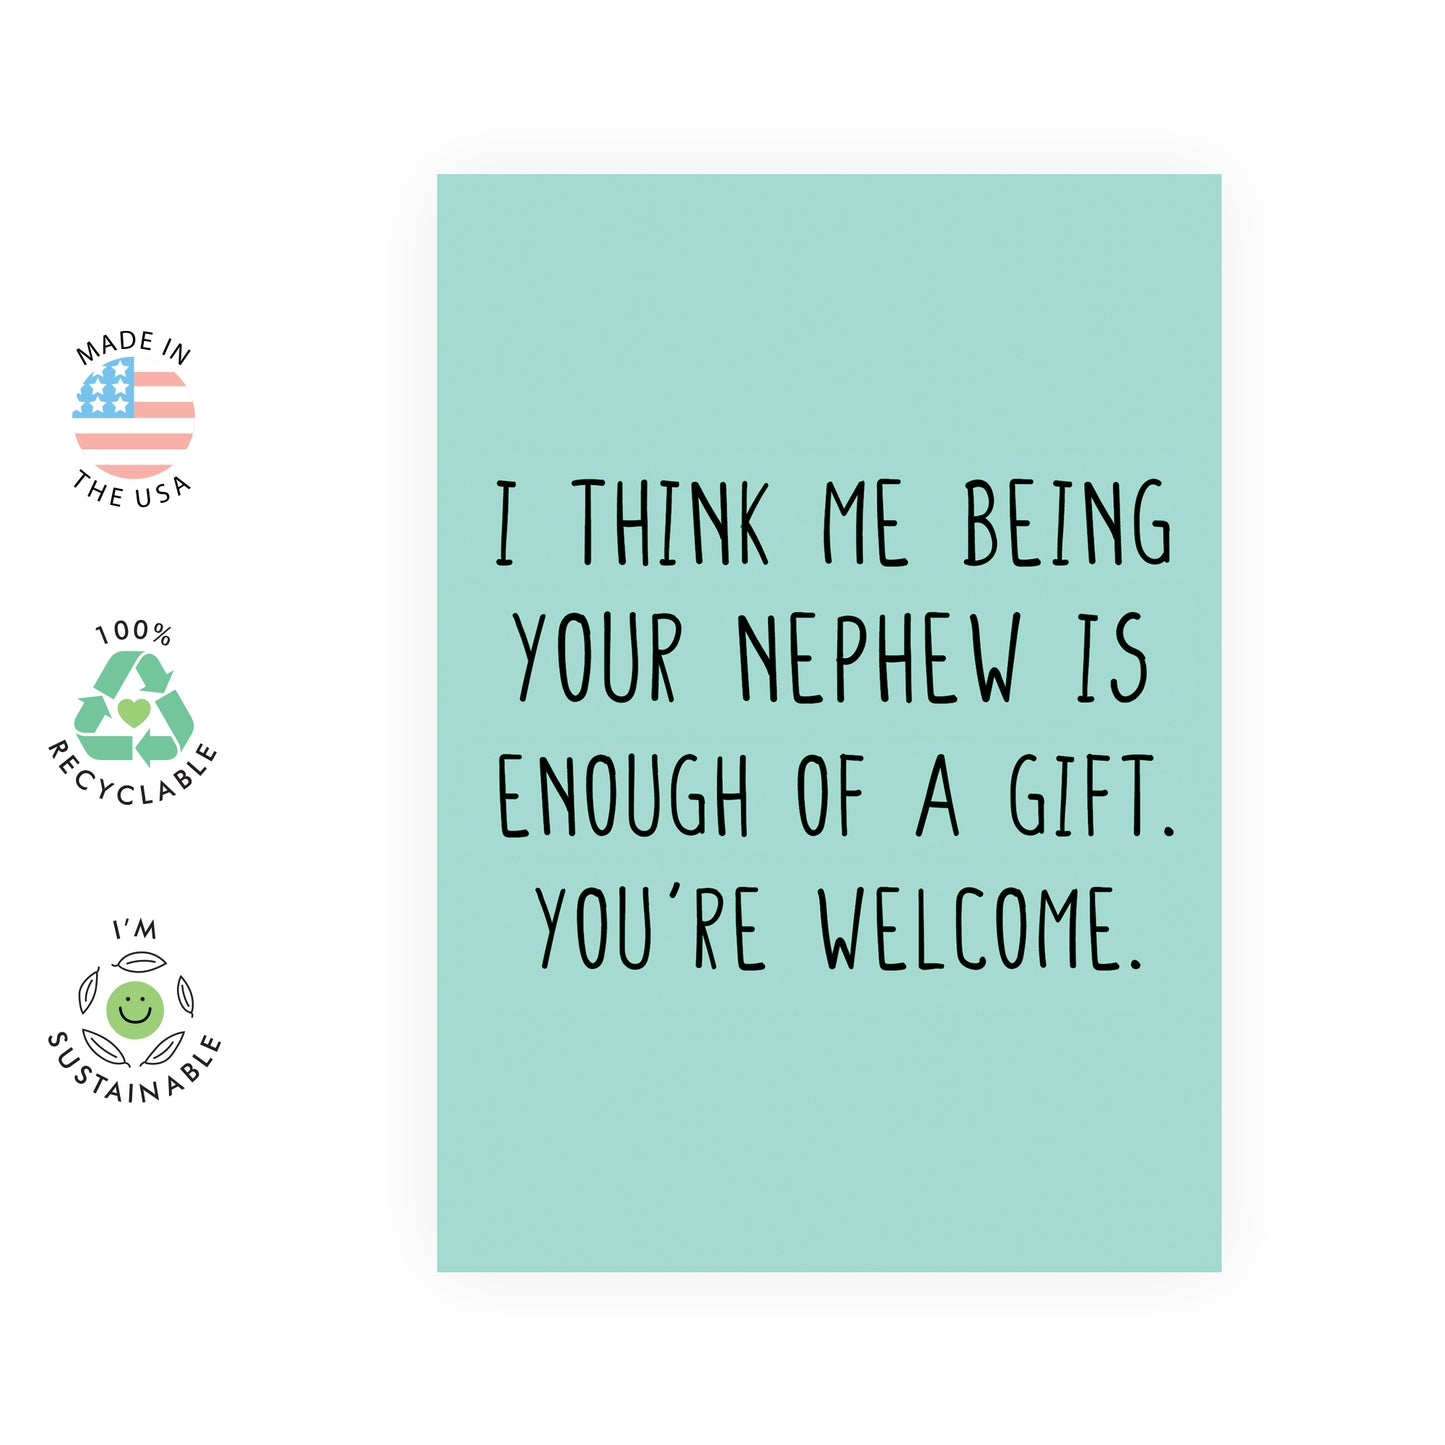 Funny Birthday Card - Me Being Your Nephew - For Men Women